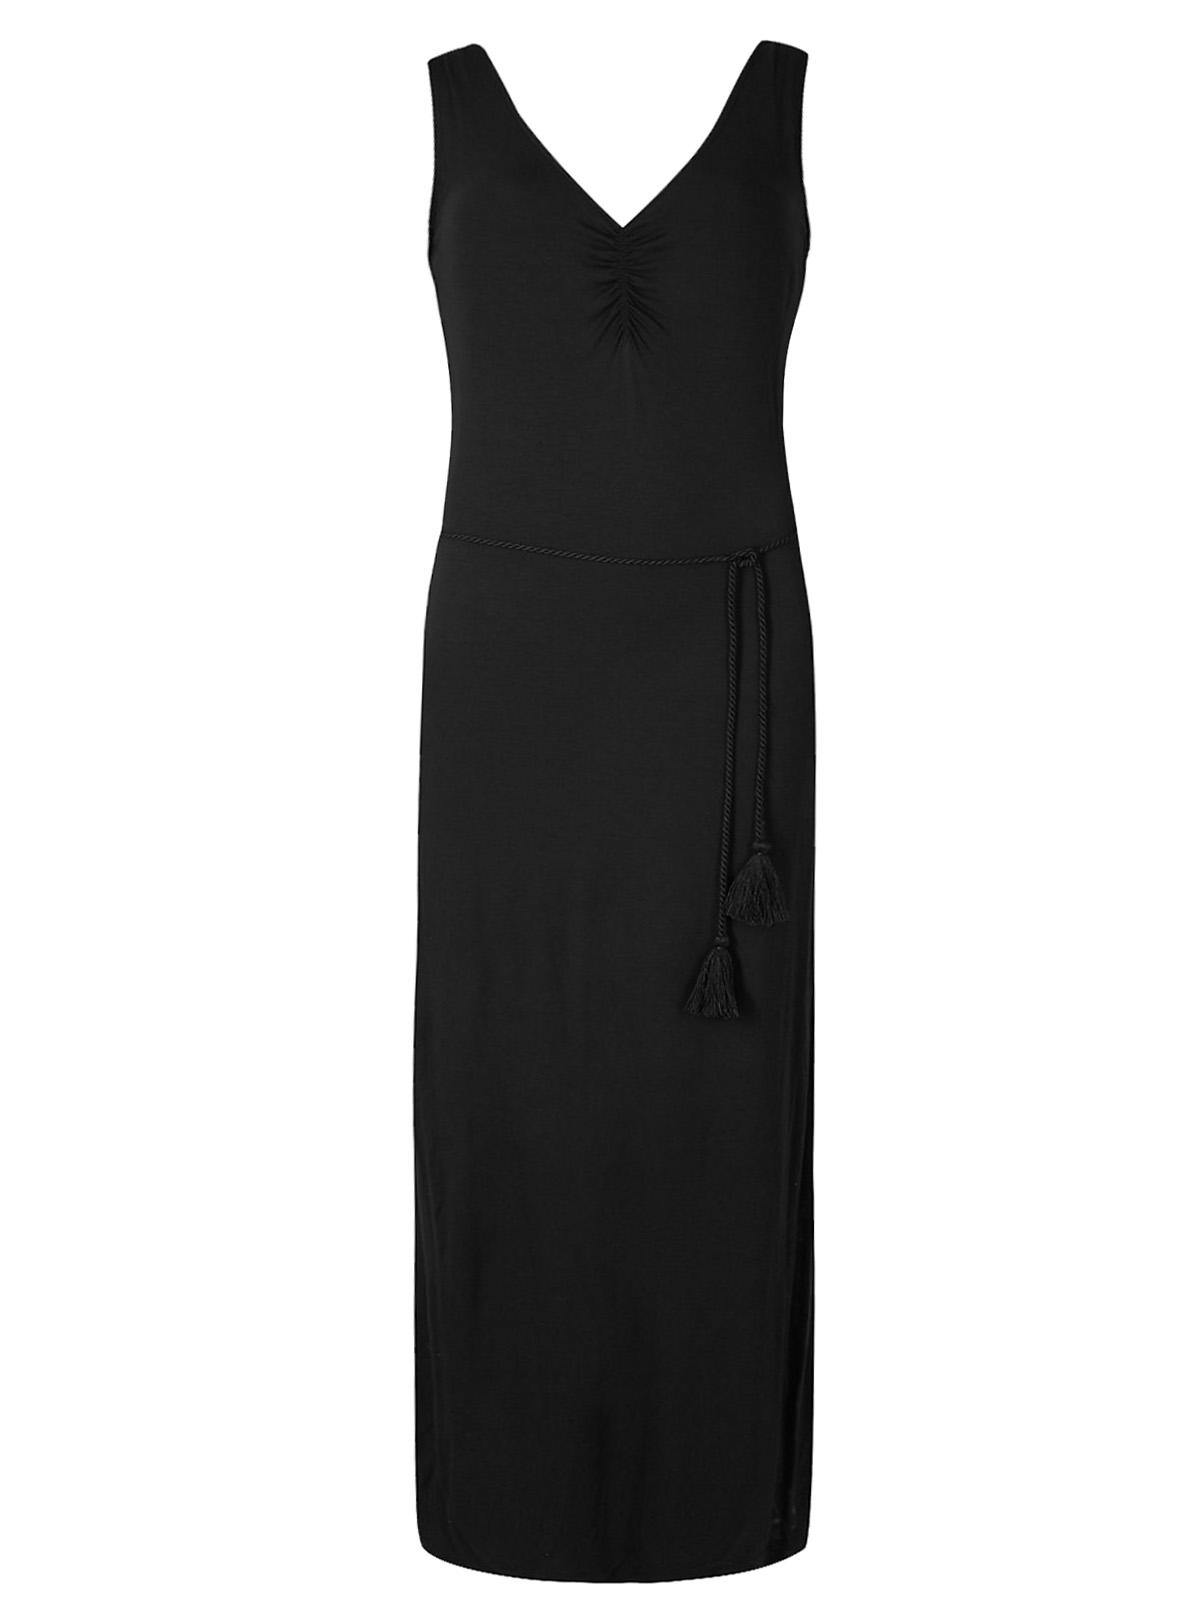 Marks and Spencer - - M&5 BLACK Ruched Front Slip Maxi Dress - Size 6 to 24